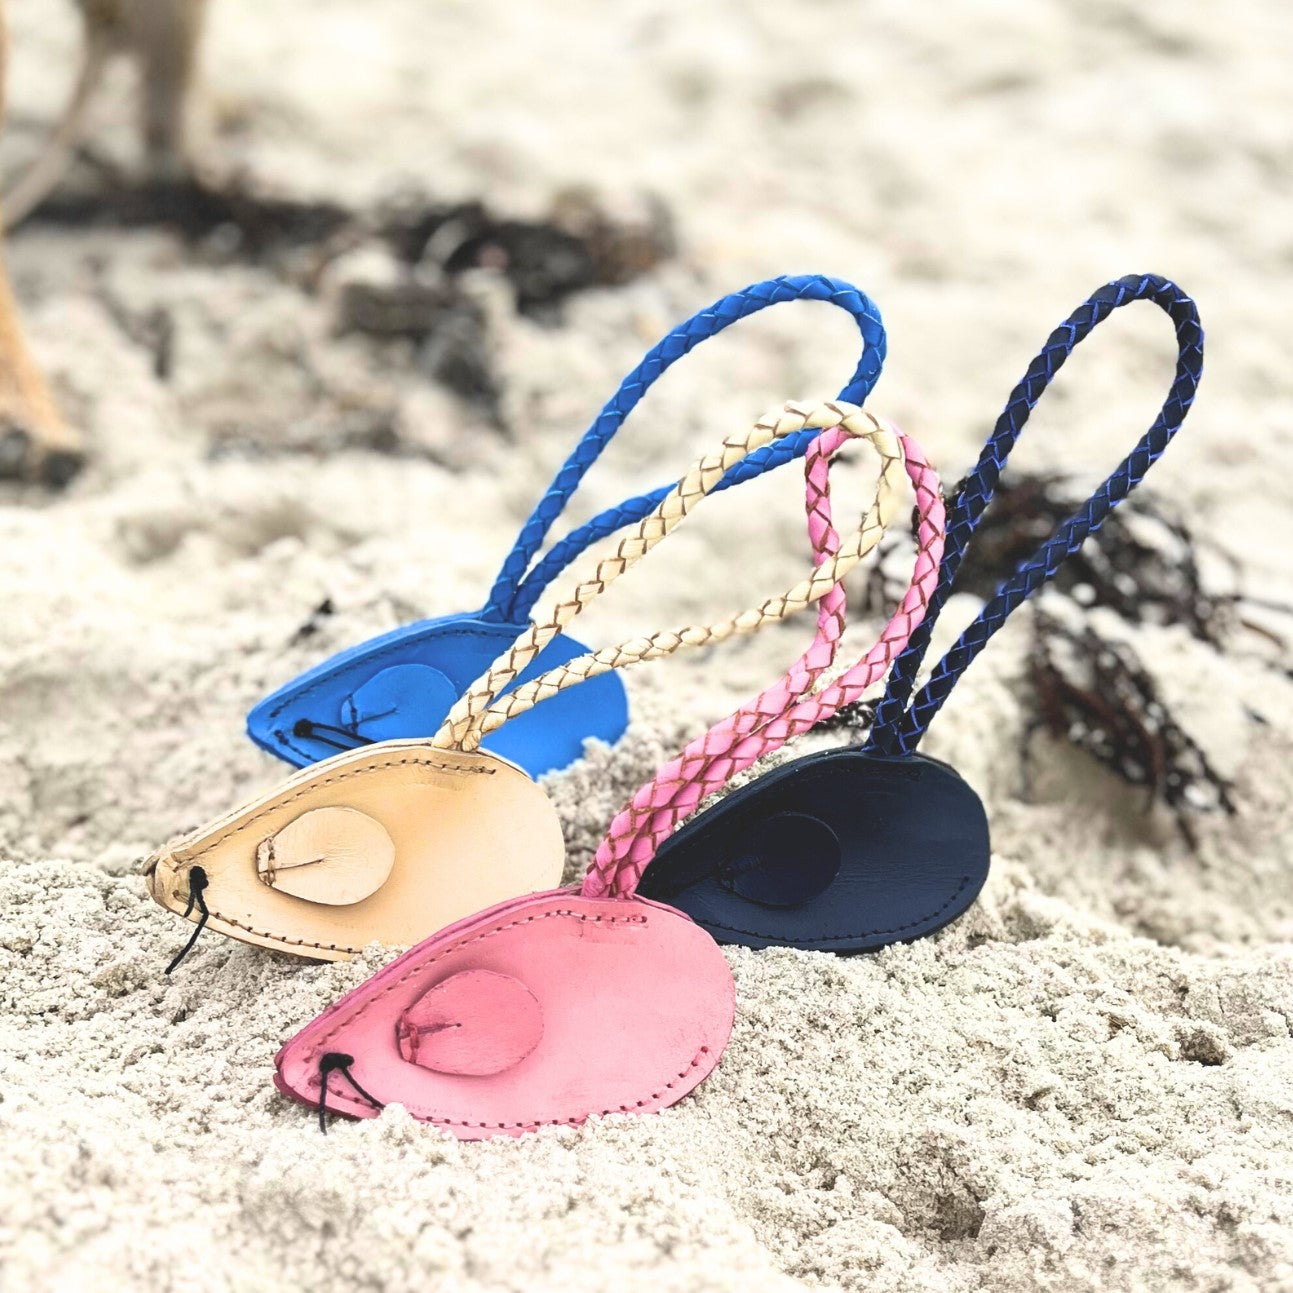 Four colorful flip-flops with buffalo leather straps embedded in beach sand, evoking a relaxed, tropical vibe and suggesting a leisurely day spent by the sea were replaced by four pink Georgie Paws Mouse Poobag Dispensers.